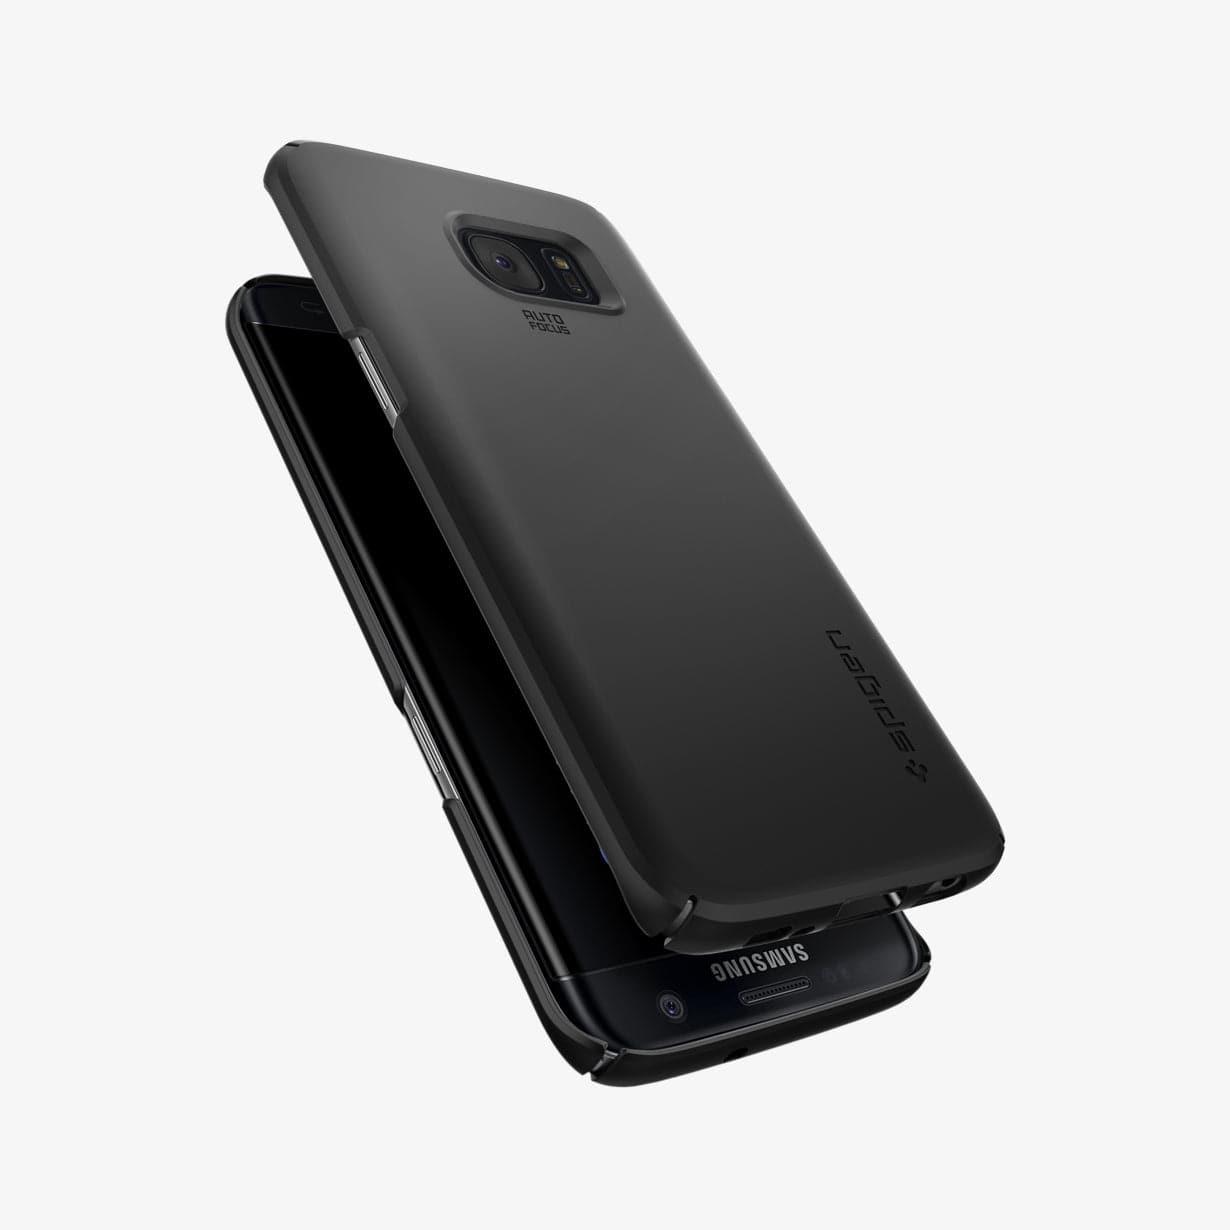 556CS20029 - Galaxy S7 Series Thin Fit Case in black showing the back, sides and front